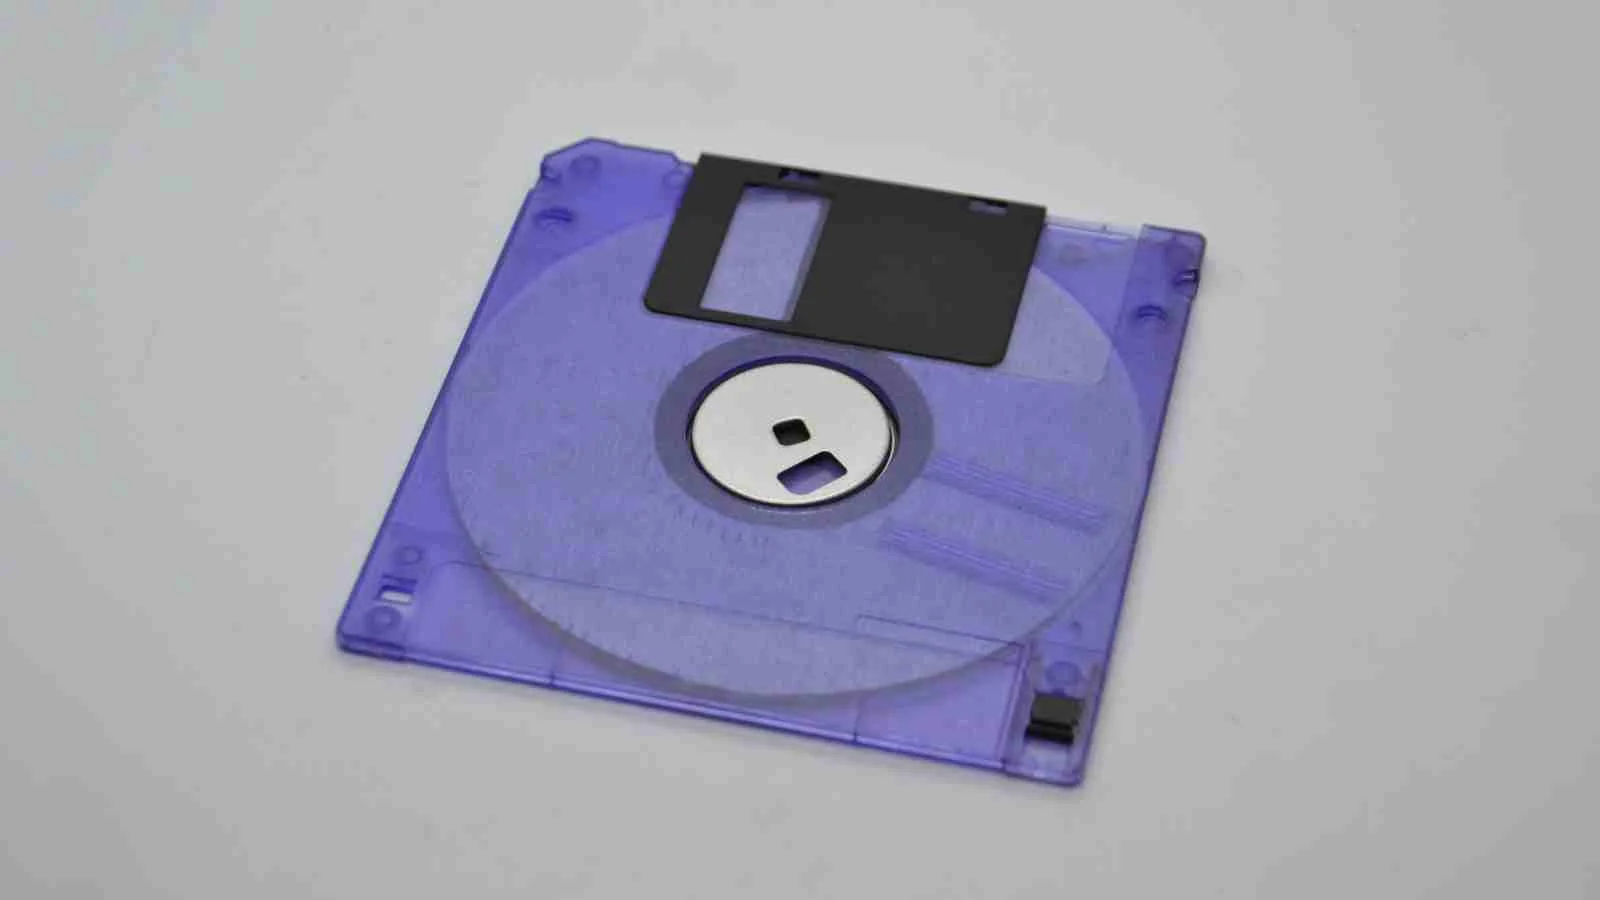 A floppy disk from the 1980s